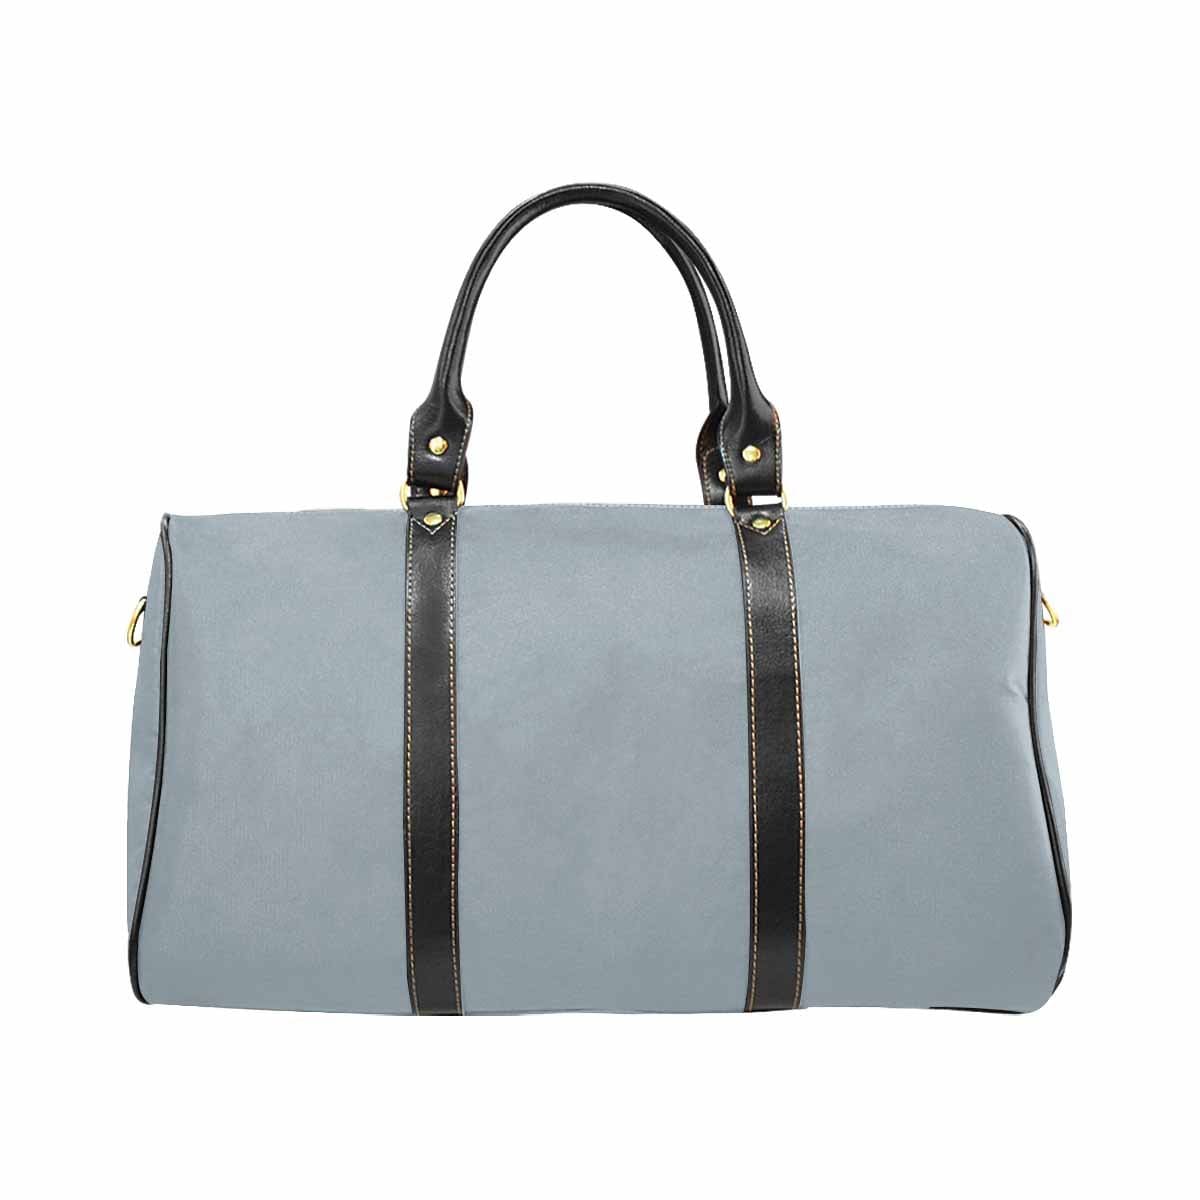 Misty Blue Gray Travel Bag Carry On Luggage Adjustable Strap Black - Bags |